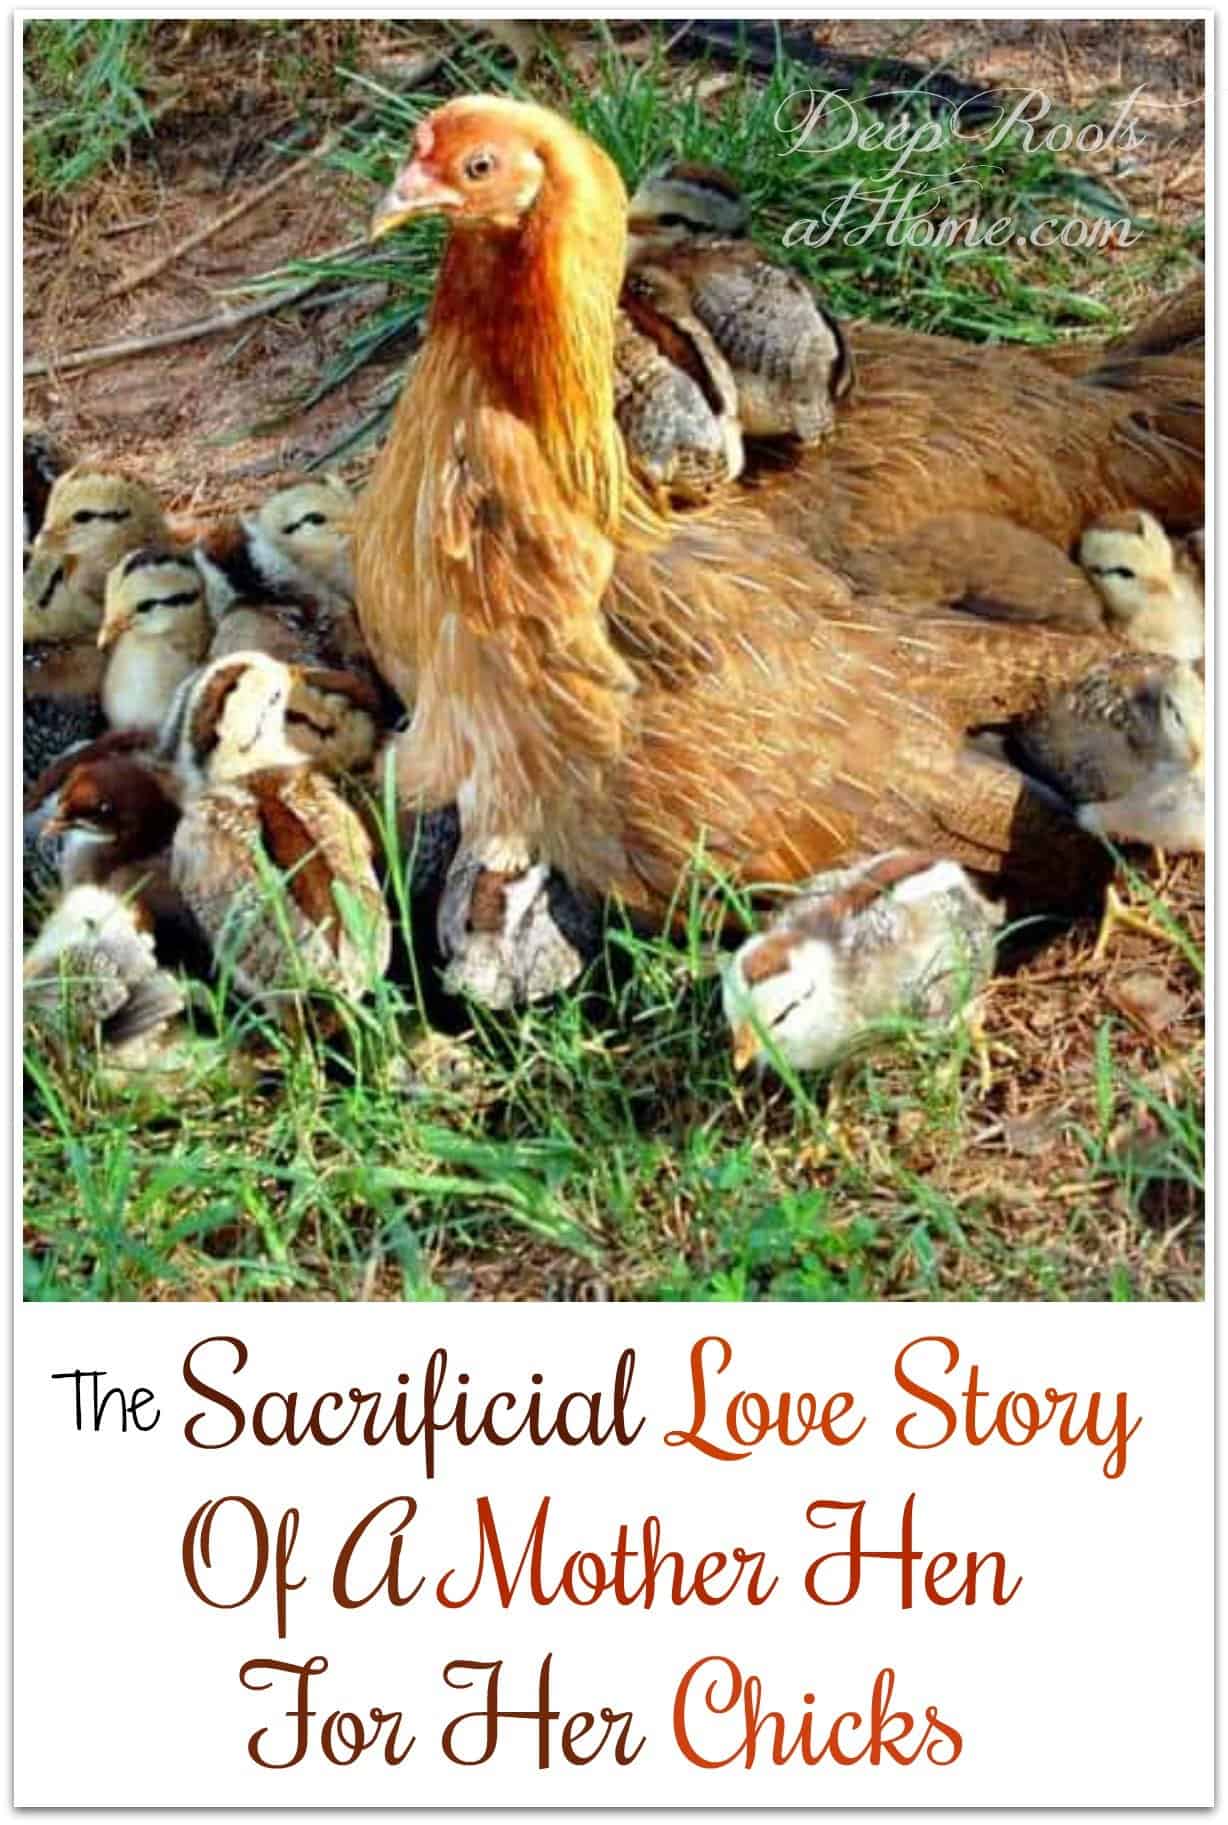 The Sacrificial Love Story Of A Mother Hen For Her Chicks. Hen surrounded by 15 chicks.